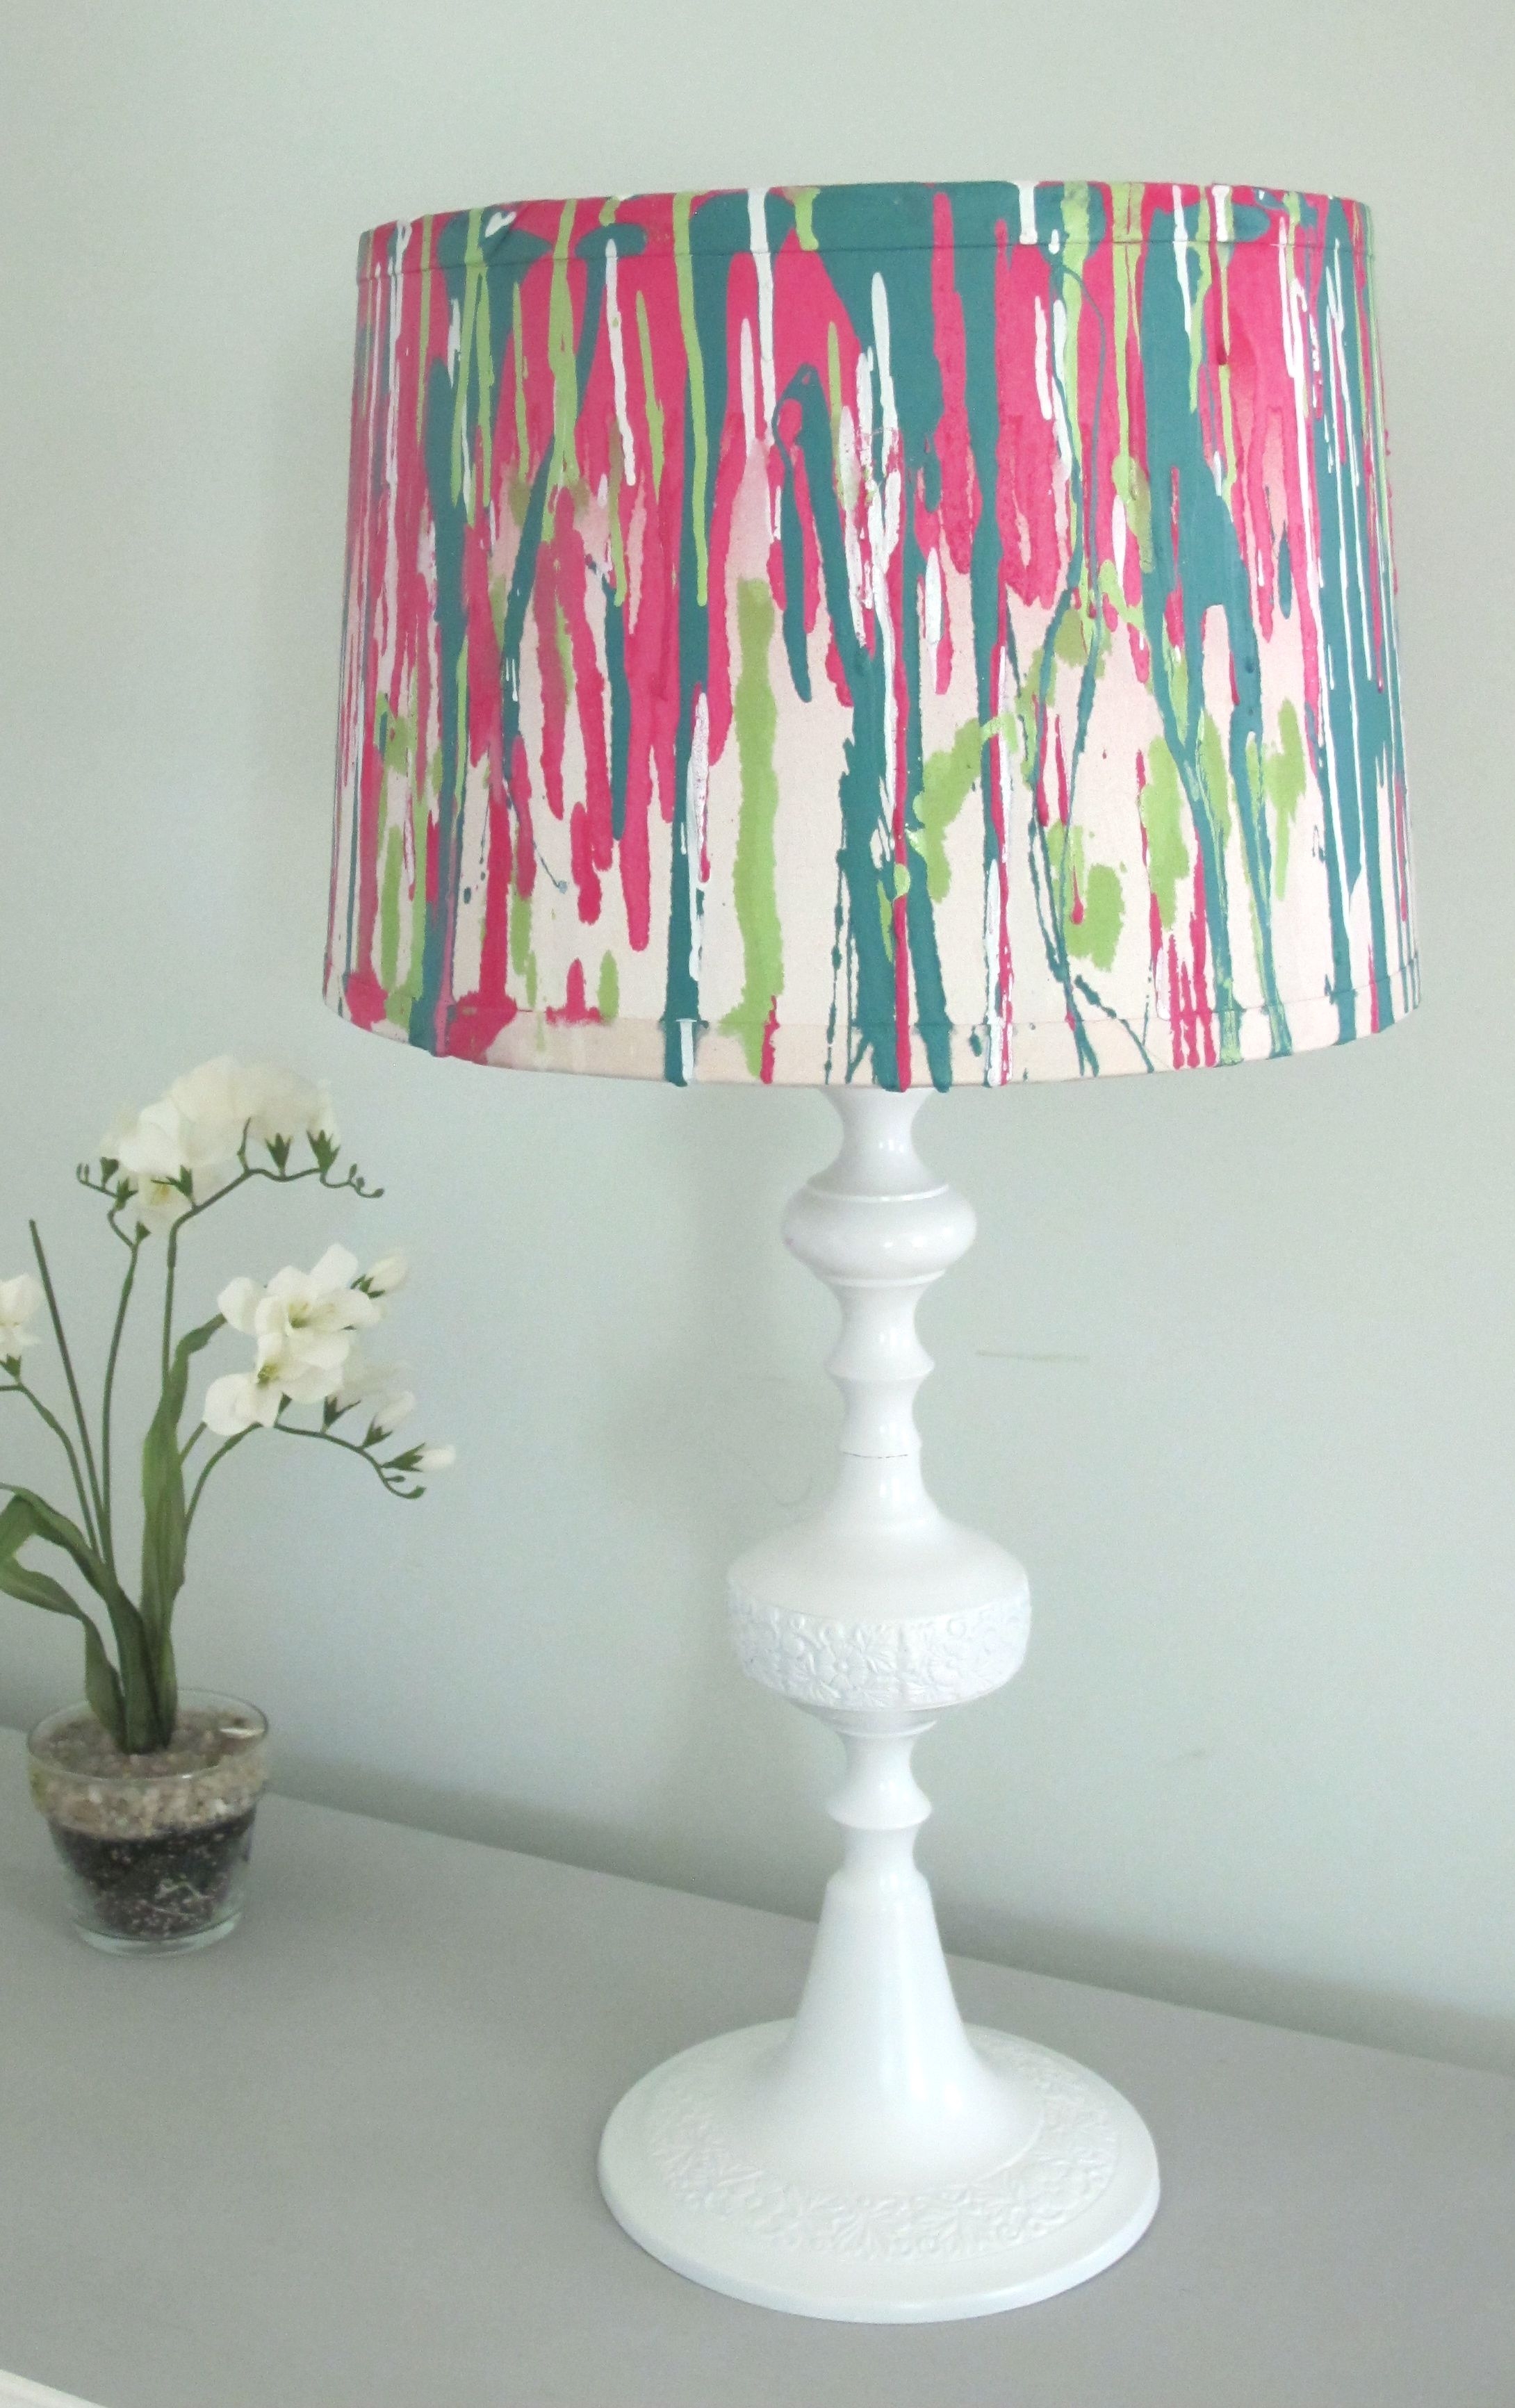 Top 10 diy projects and post of 2013 thrift diving